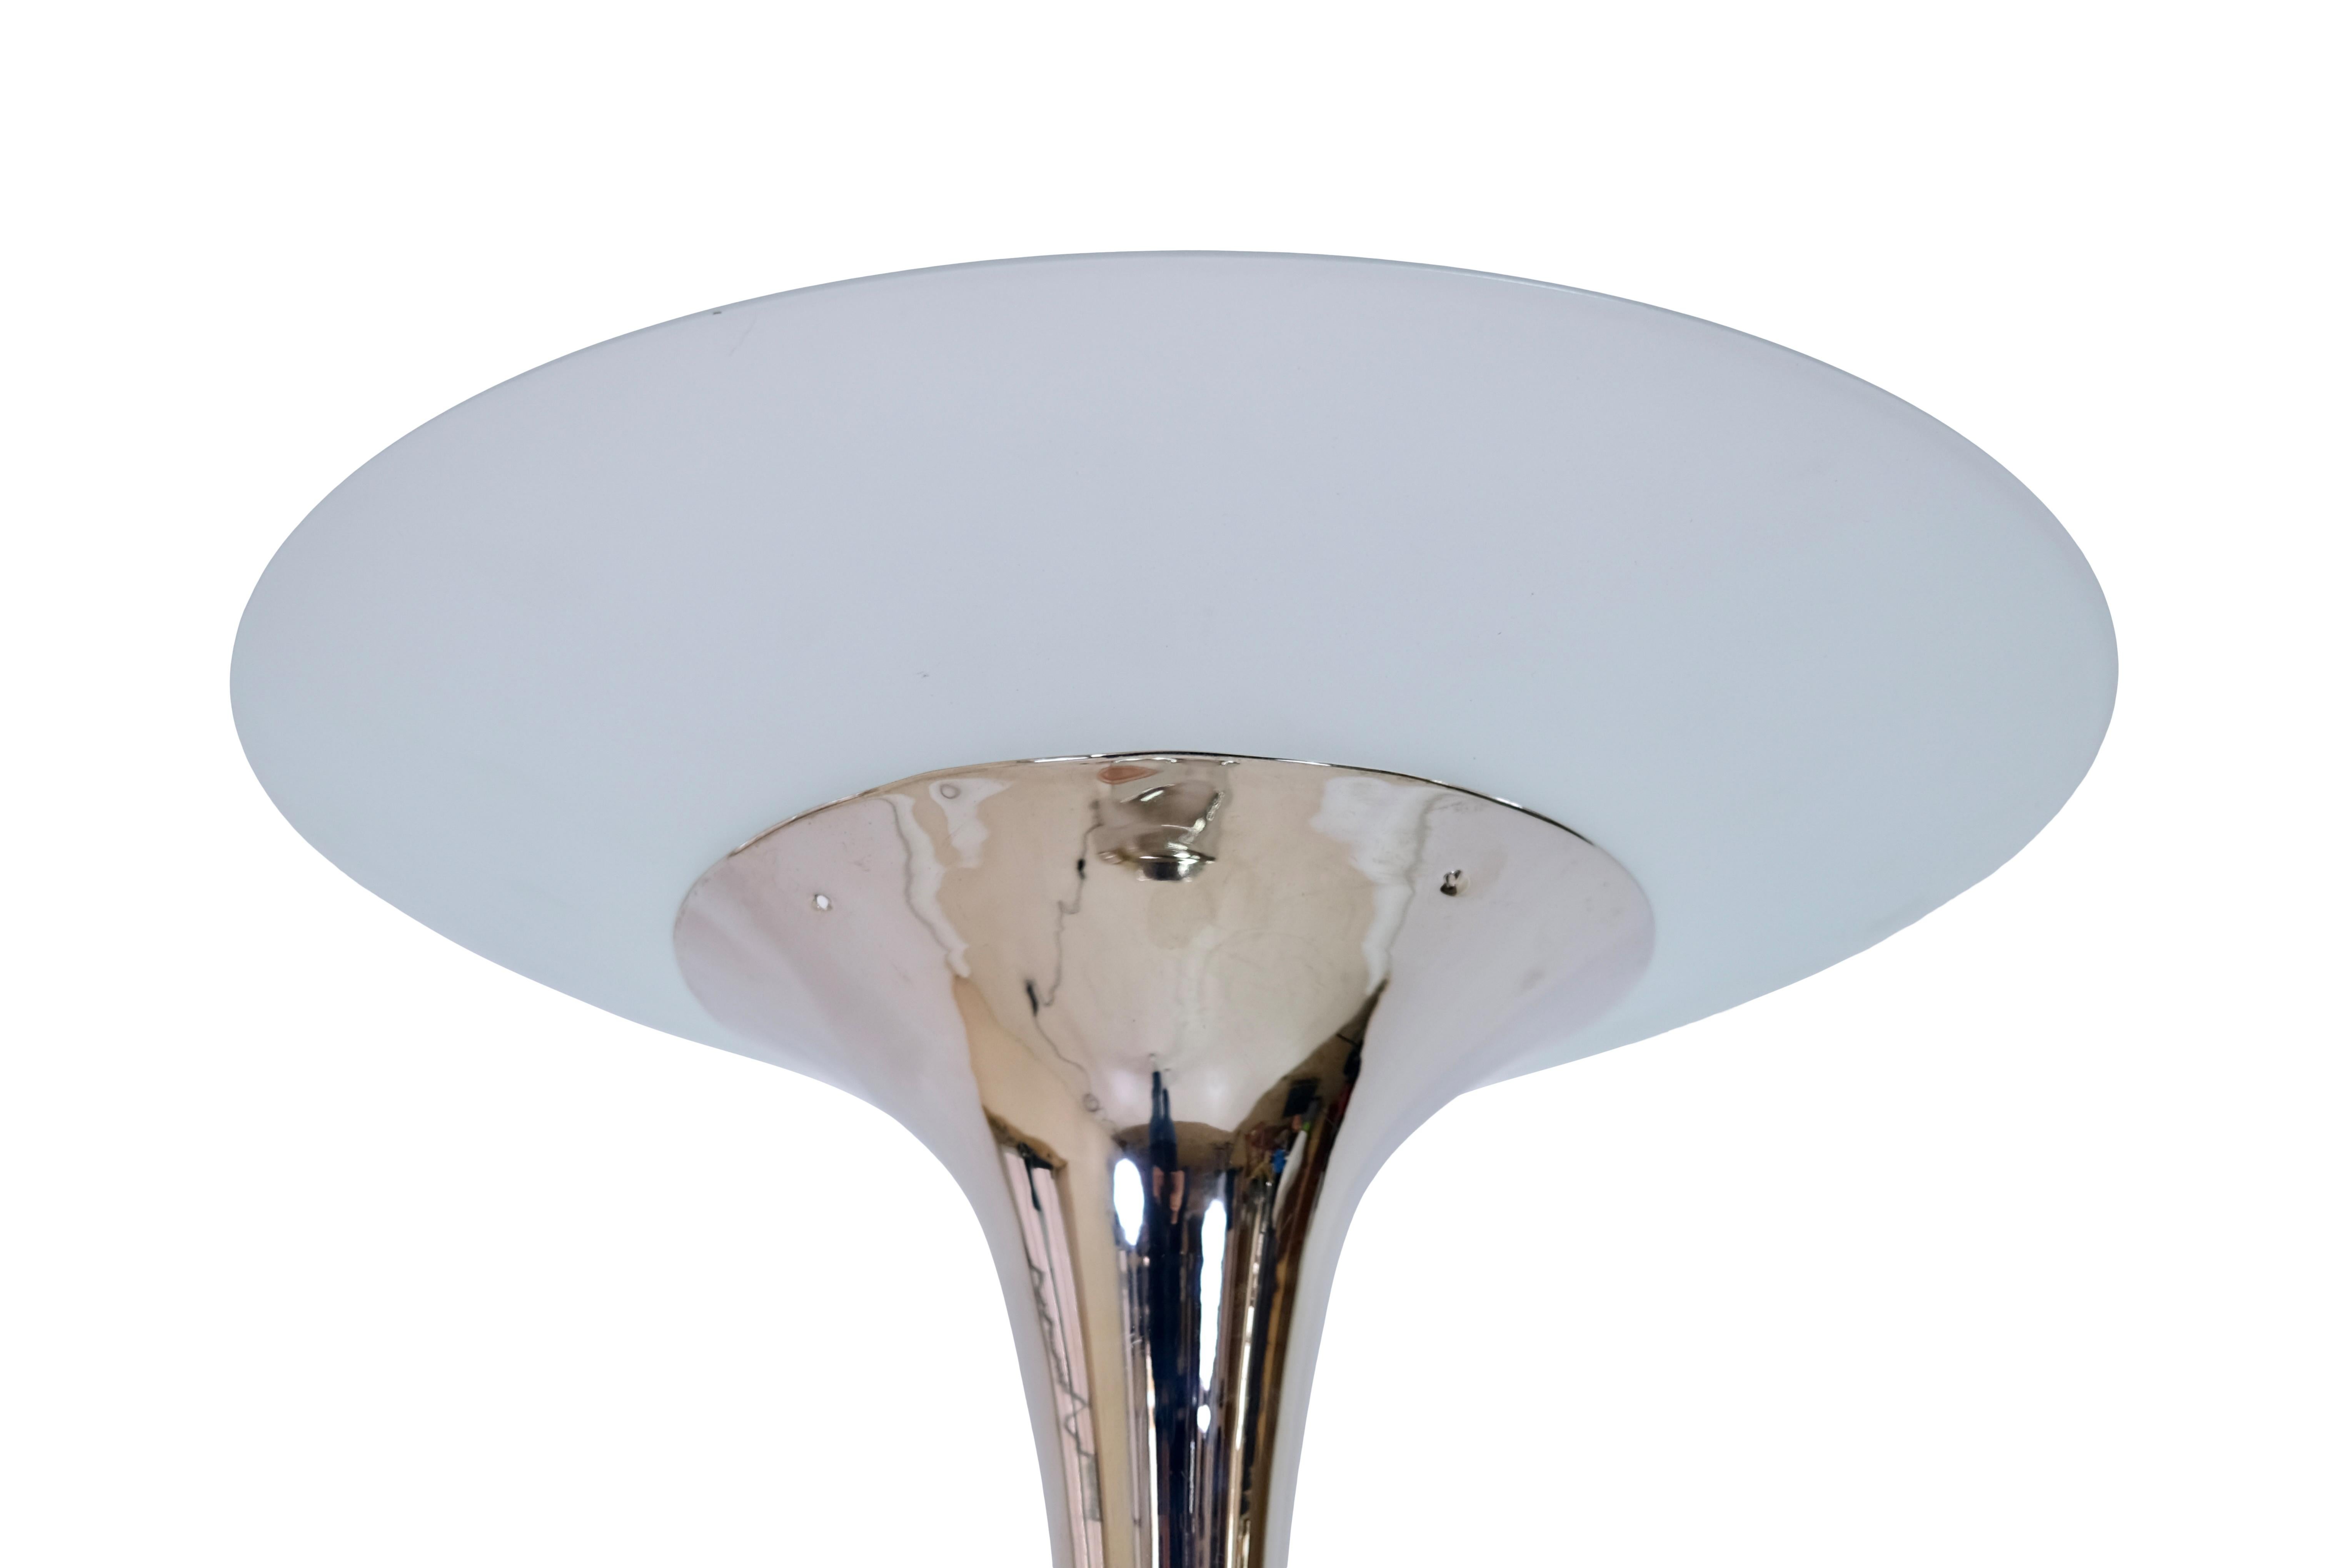 Floor lamp with funnel shaped ceiling floodlight and satin glass ring.
Fresh nickel plated.
Orange glass rings in the stem.

Original Art Deco, France 1930s.

Measurements: 
Diameter, shade: 48 cm
Diameter, base: 33 cm
Height: 180 cm.